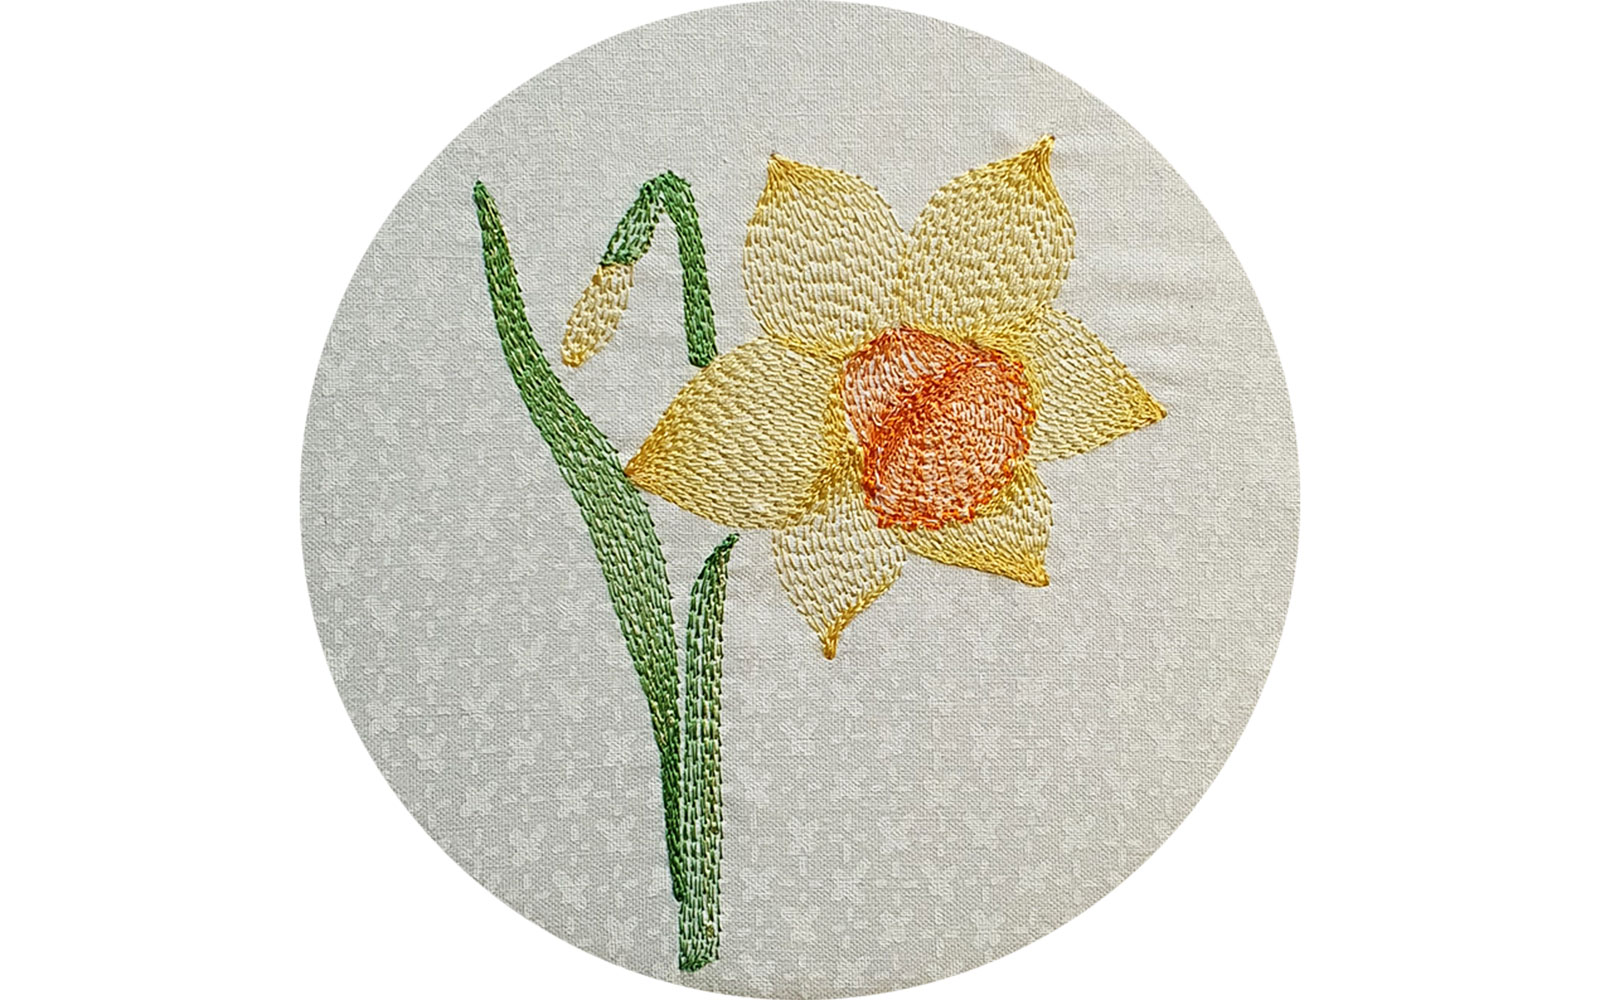 Embroidered yellow daffodil on white fabric.